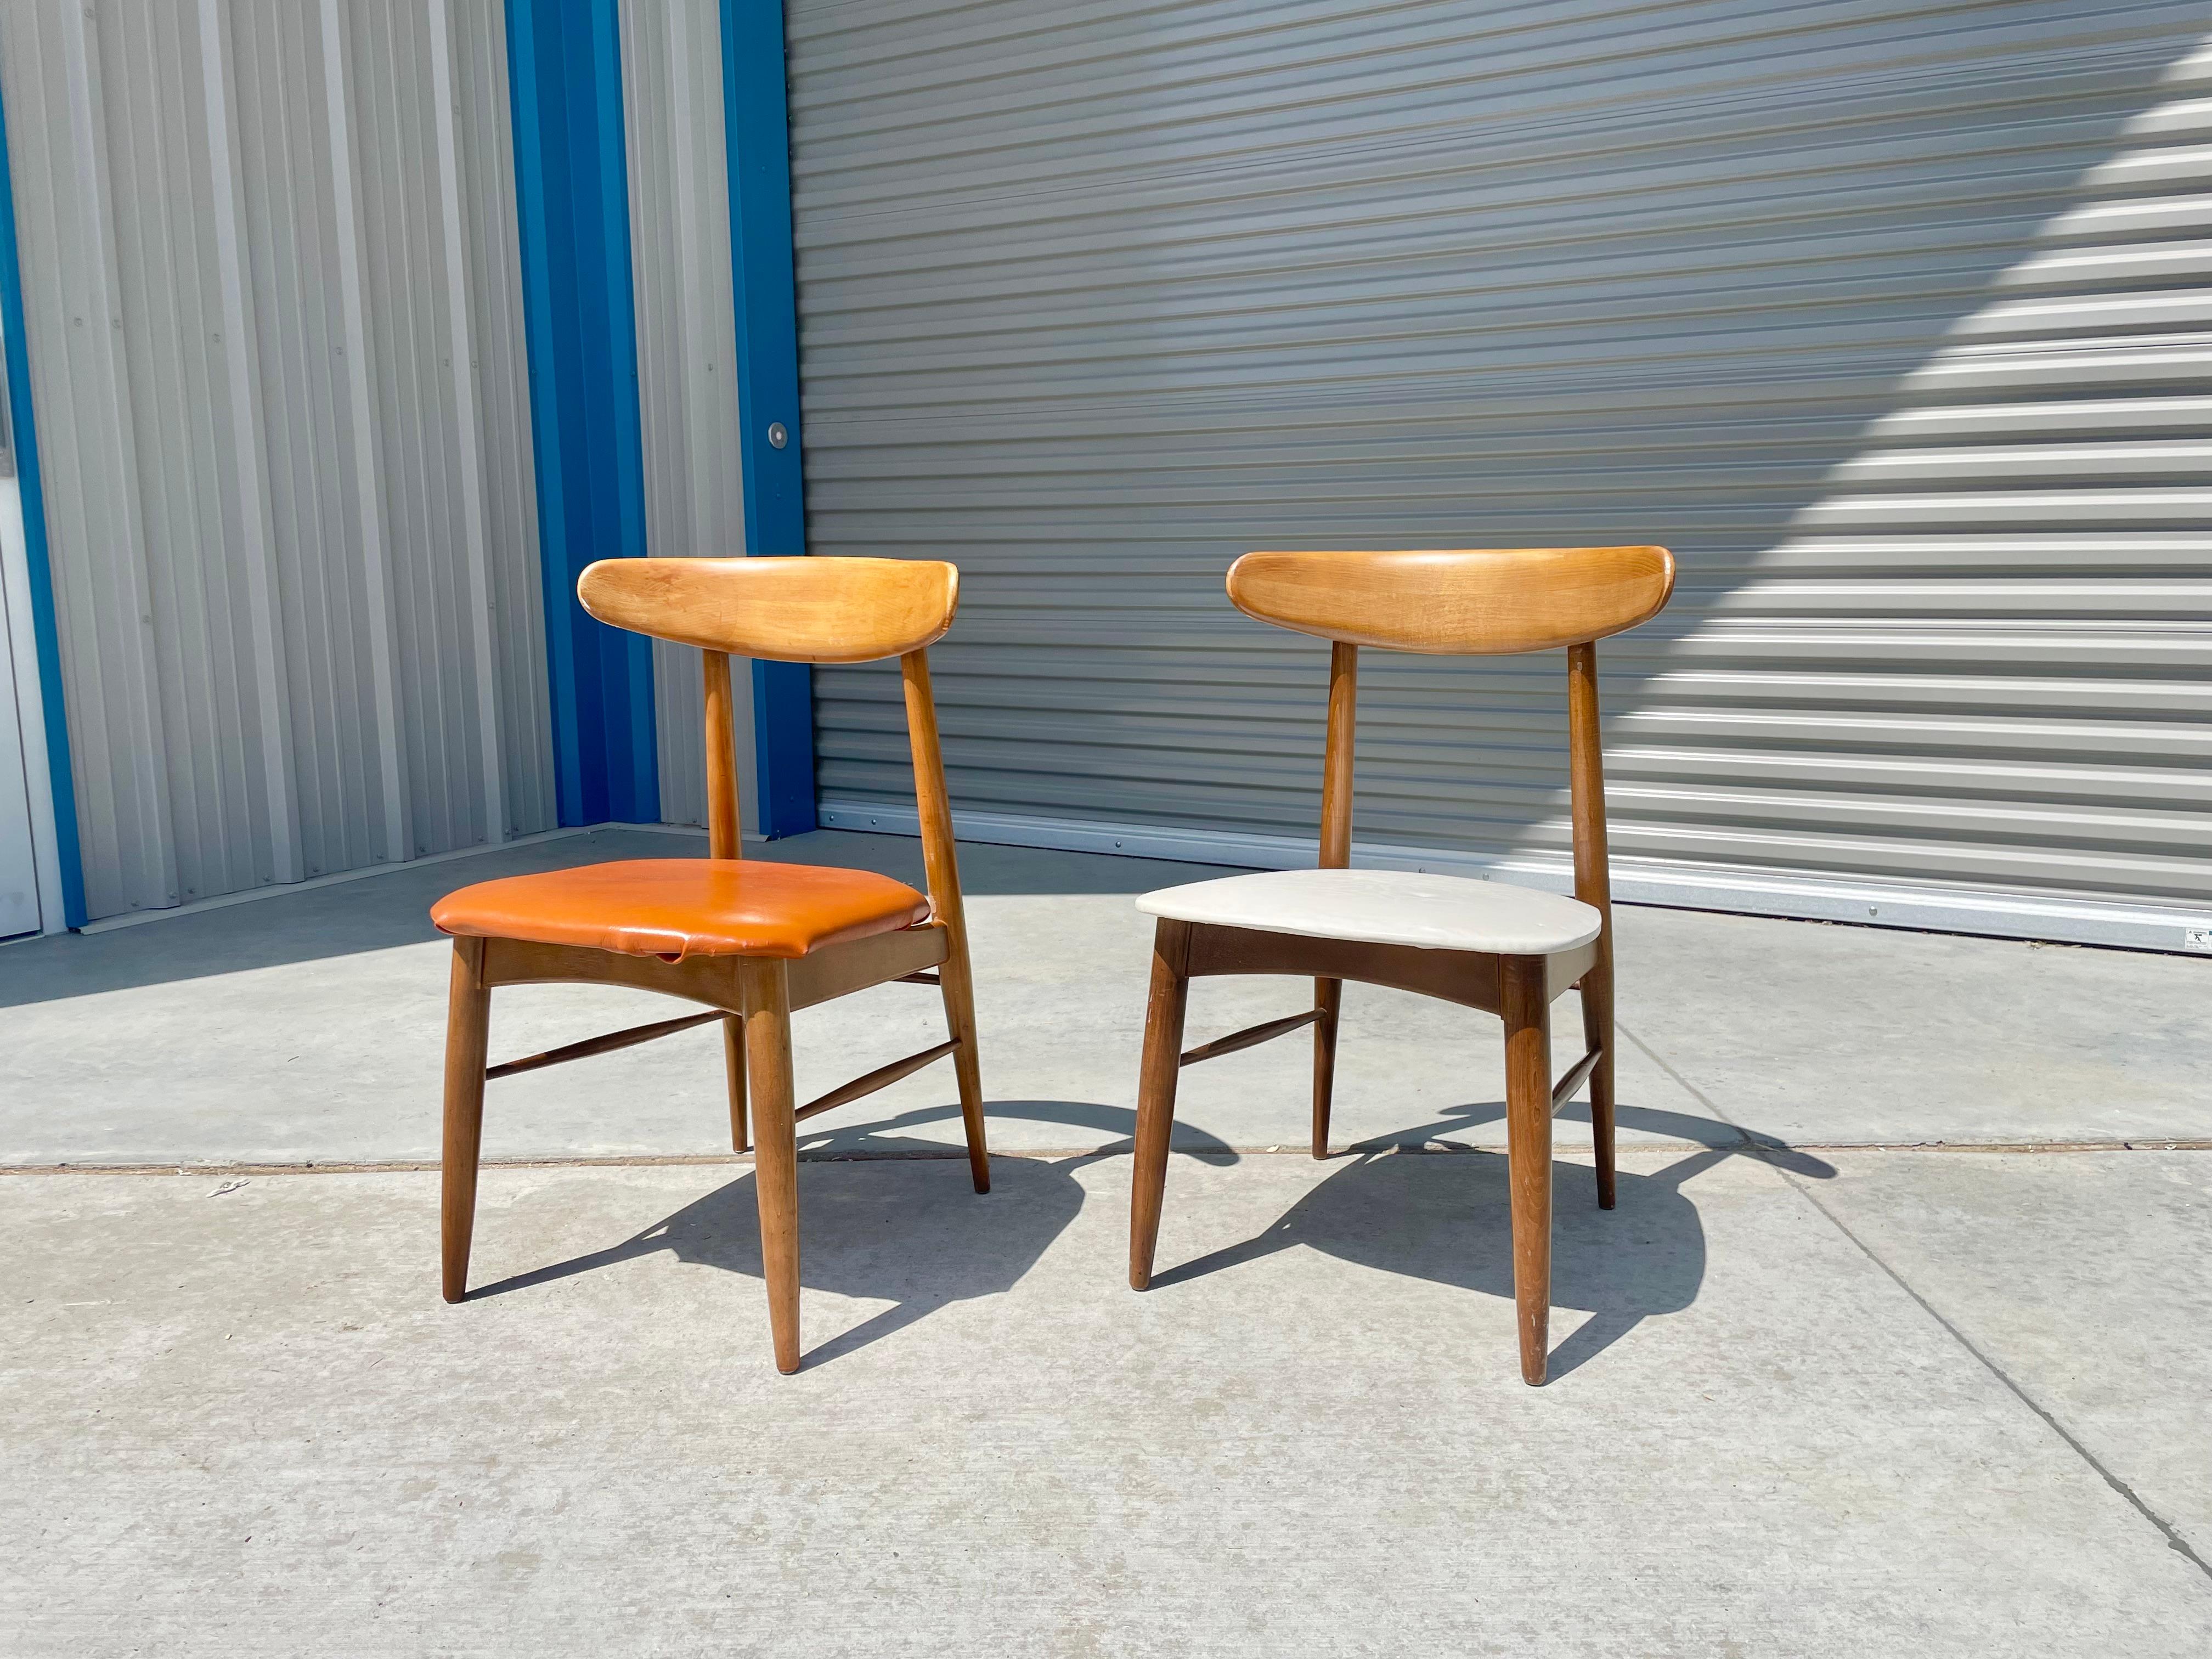 Pair of mid-century modern maple side chairs designed and manufactured in the United States during the 1960s. These chairs are truly a sight to behold, with a beautiful maple wooden frame that is both elegant and sturdy. One of the most striking